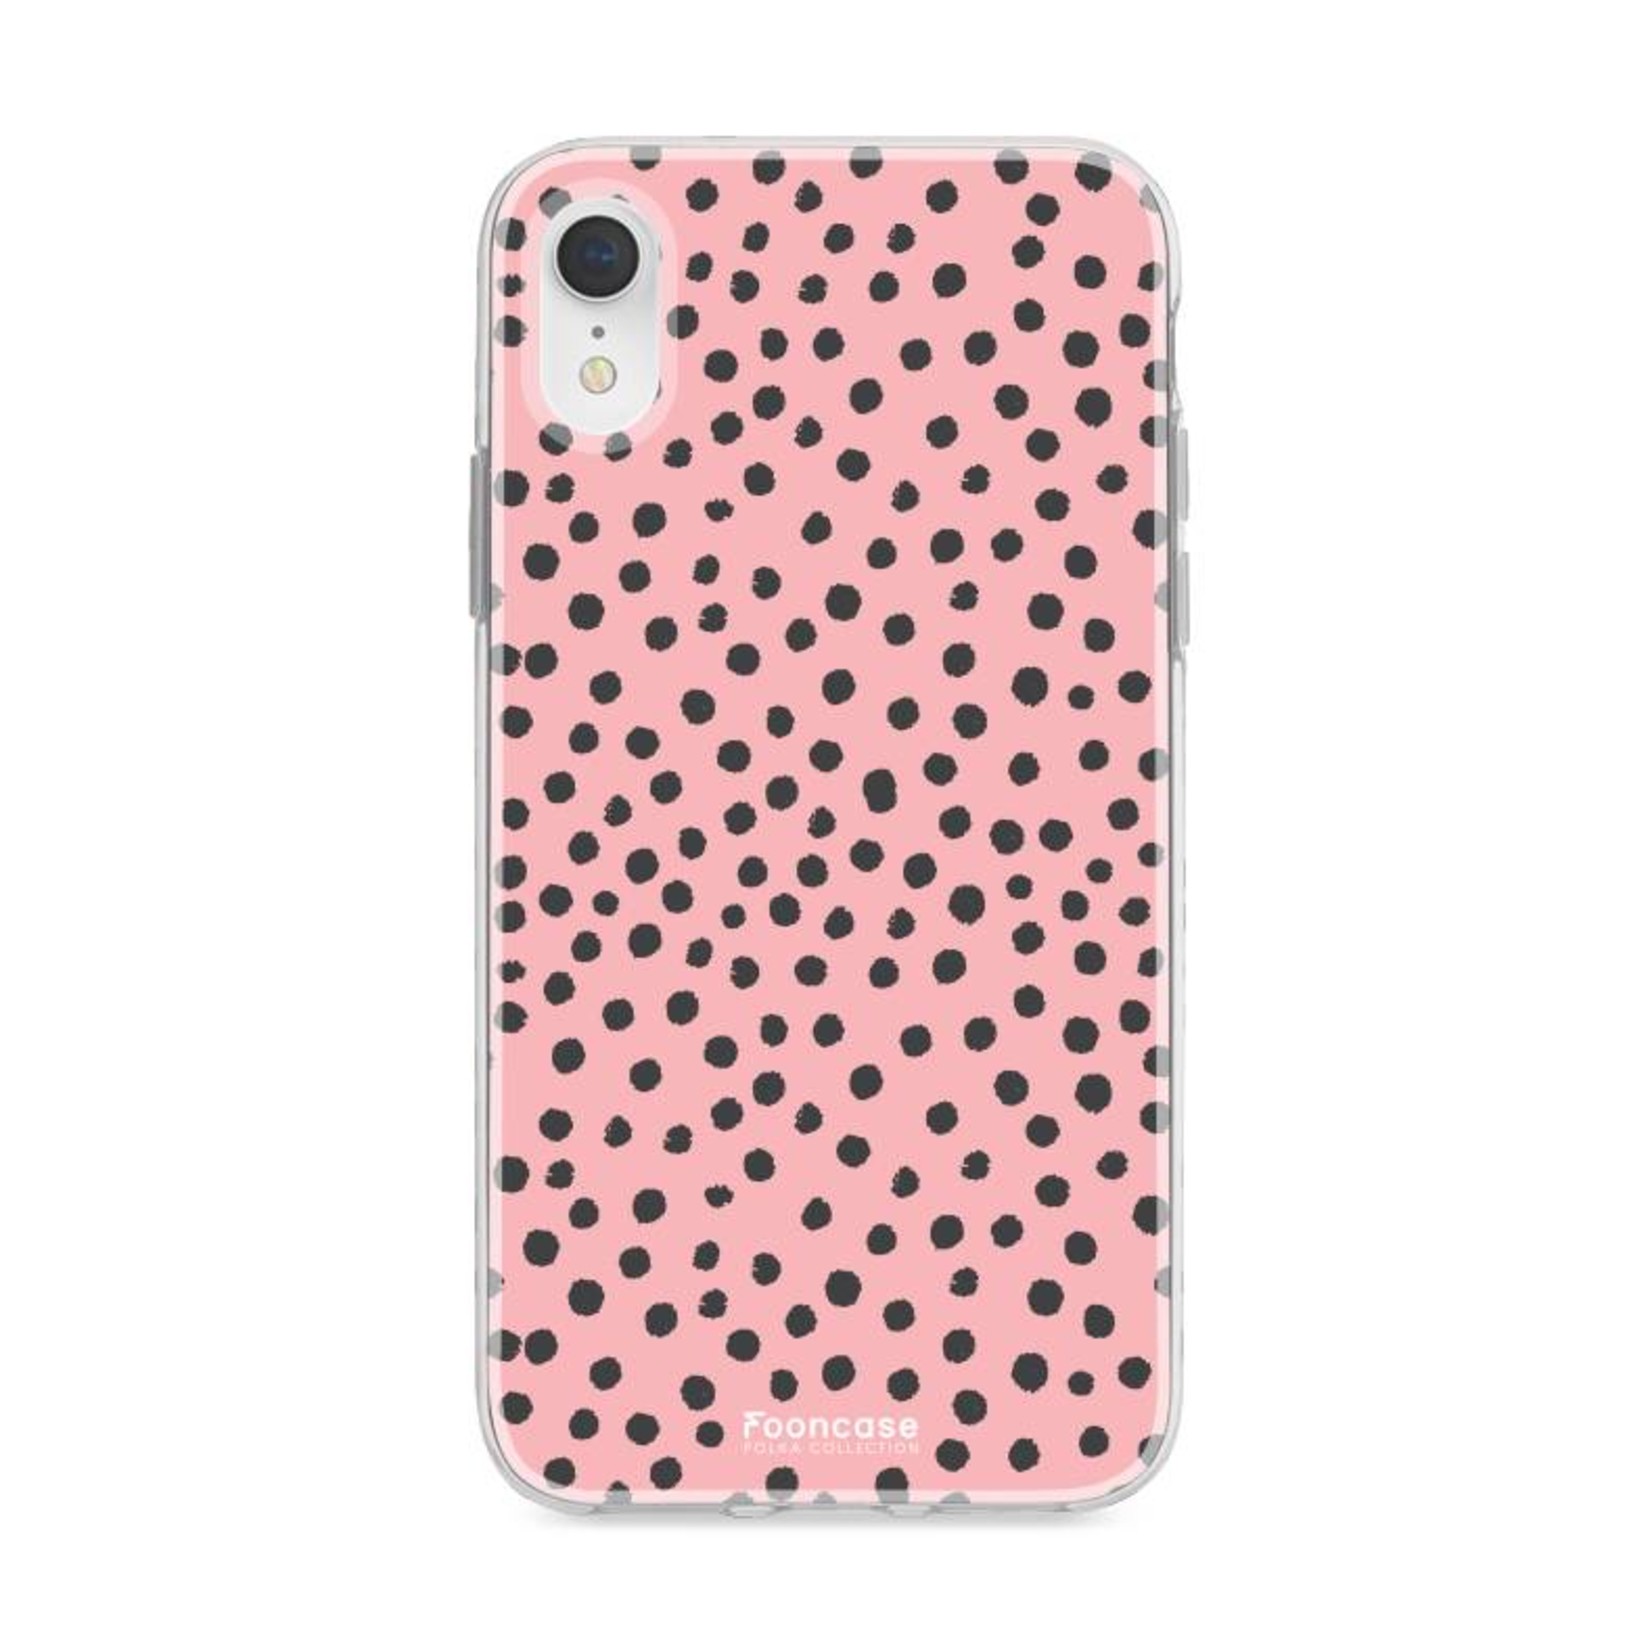 FOONCASE Iphone XR - POLKA COLLECTION / Rosa